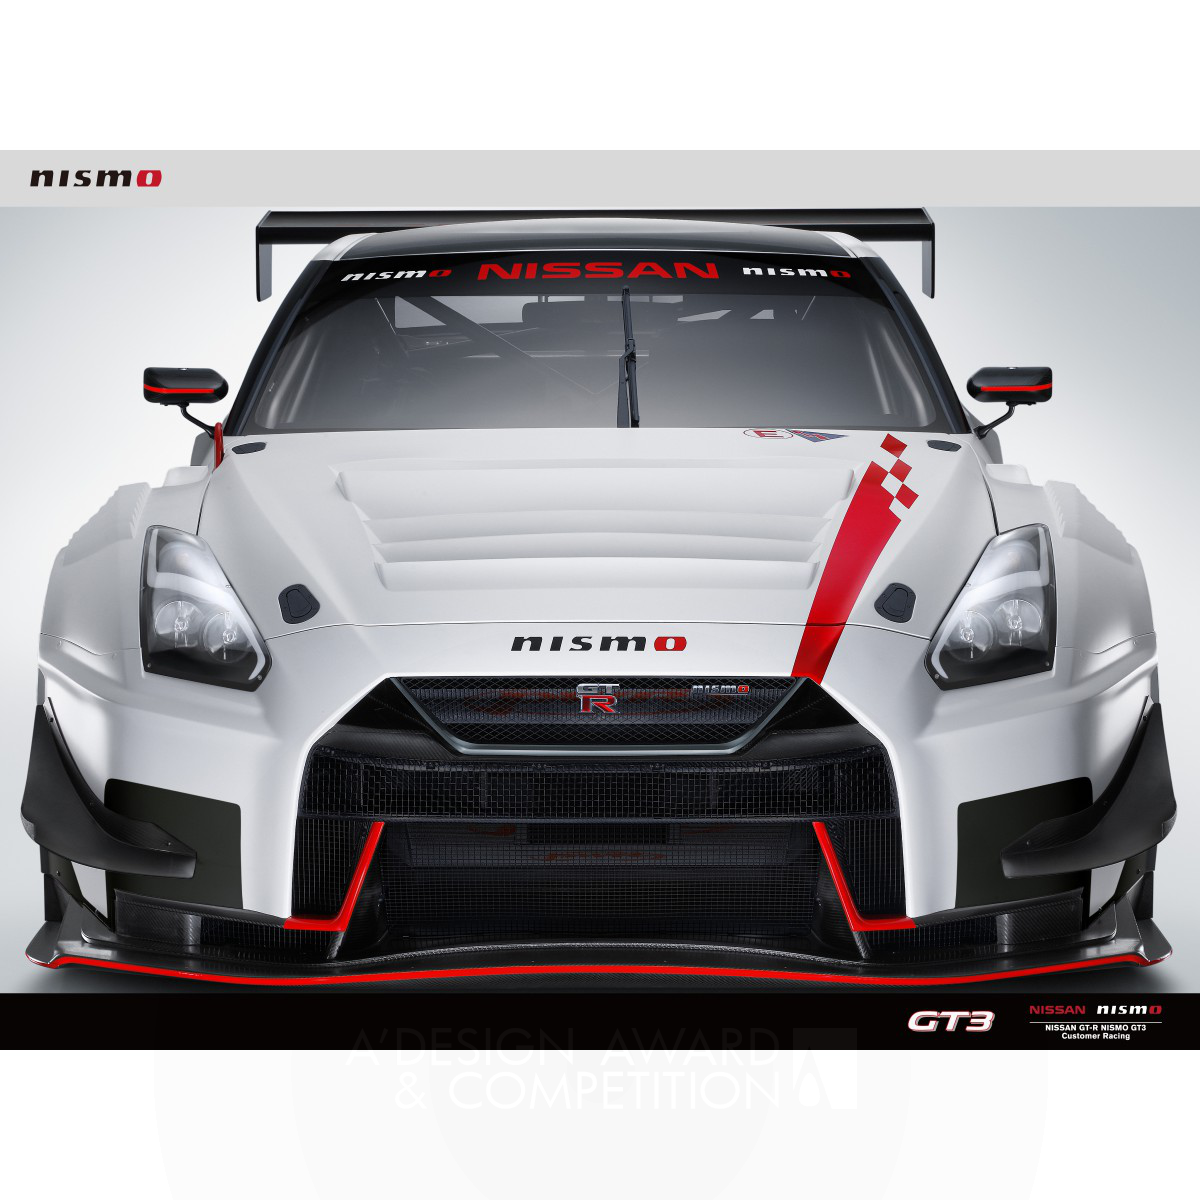 Unveiling the Nissan GT-R Nismo GT3 2018: A Masterpiece in Automotive Design